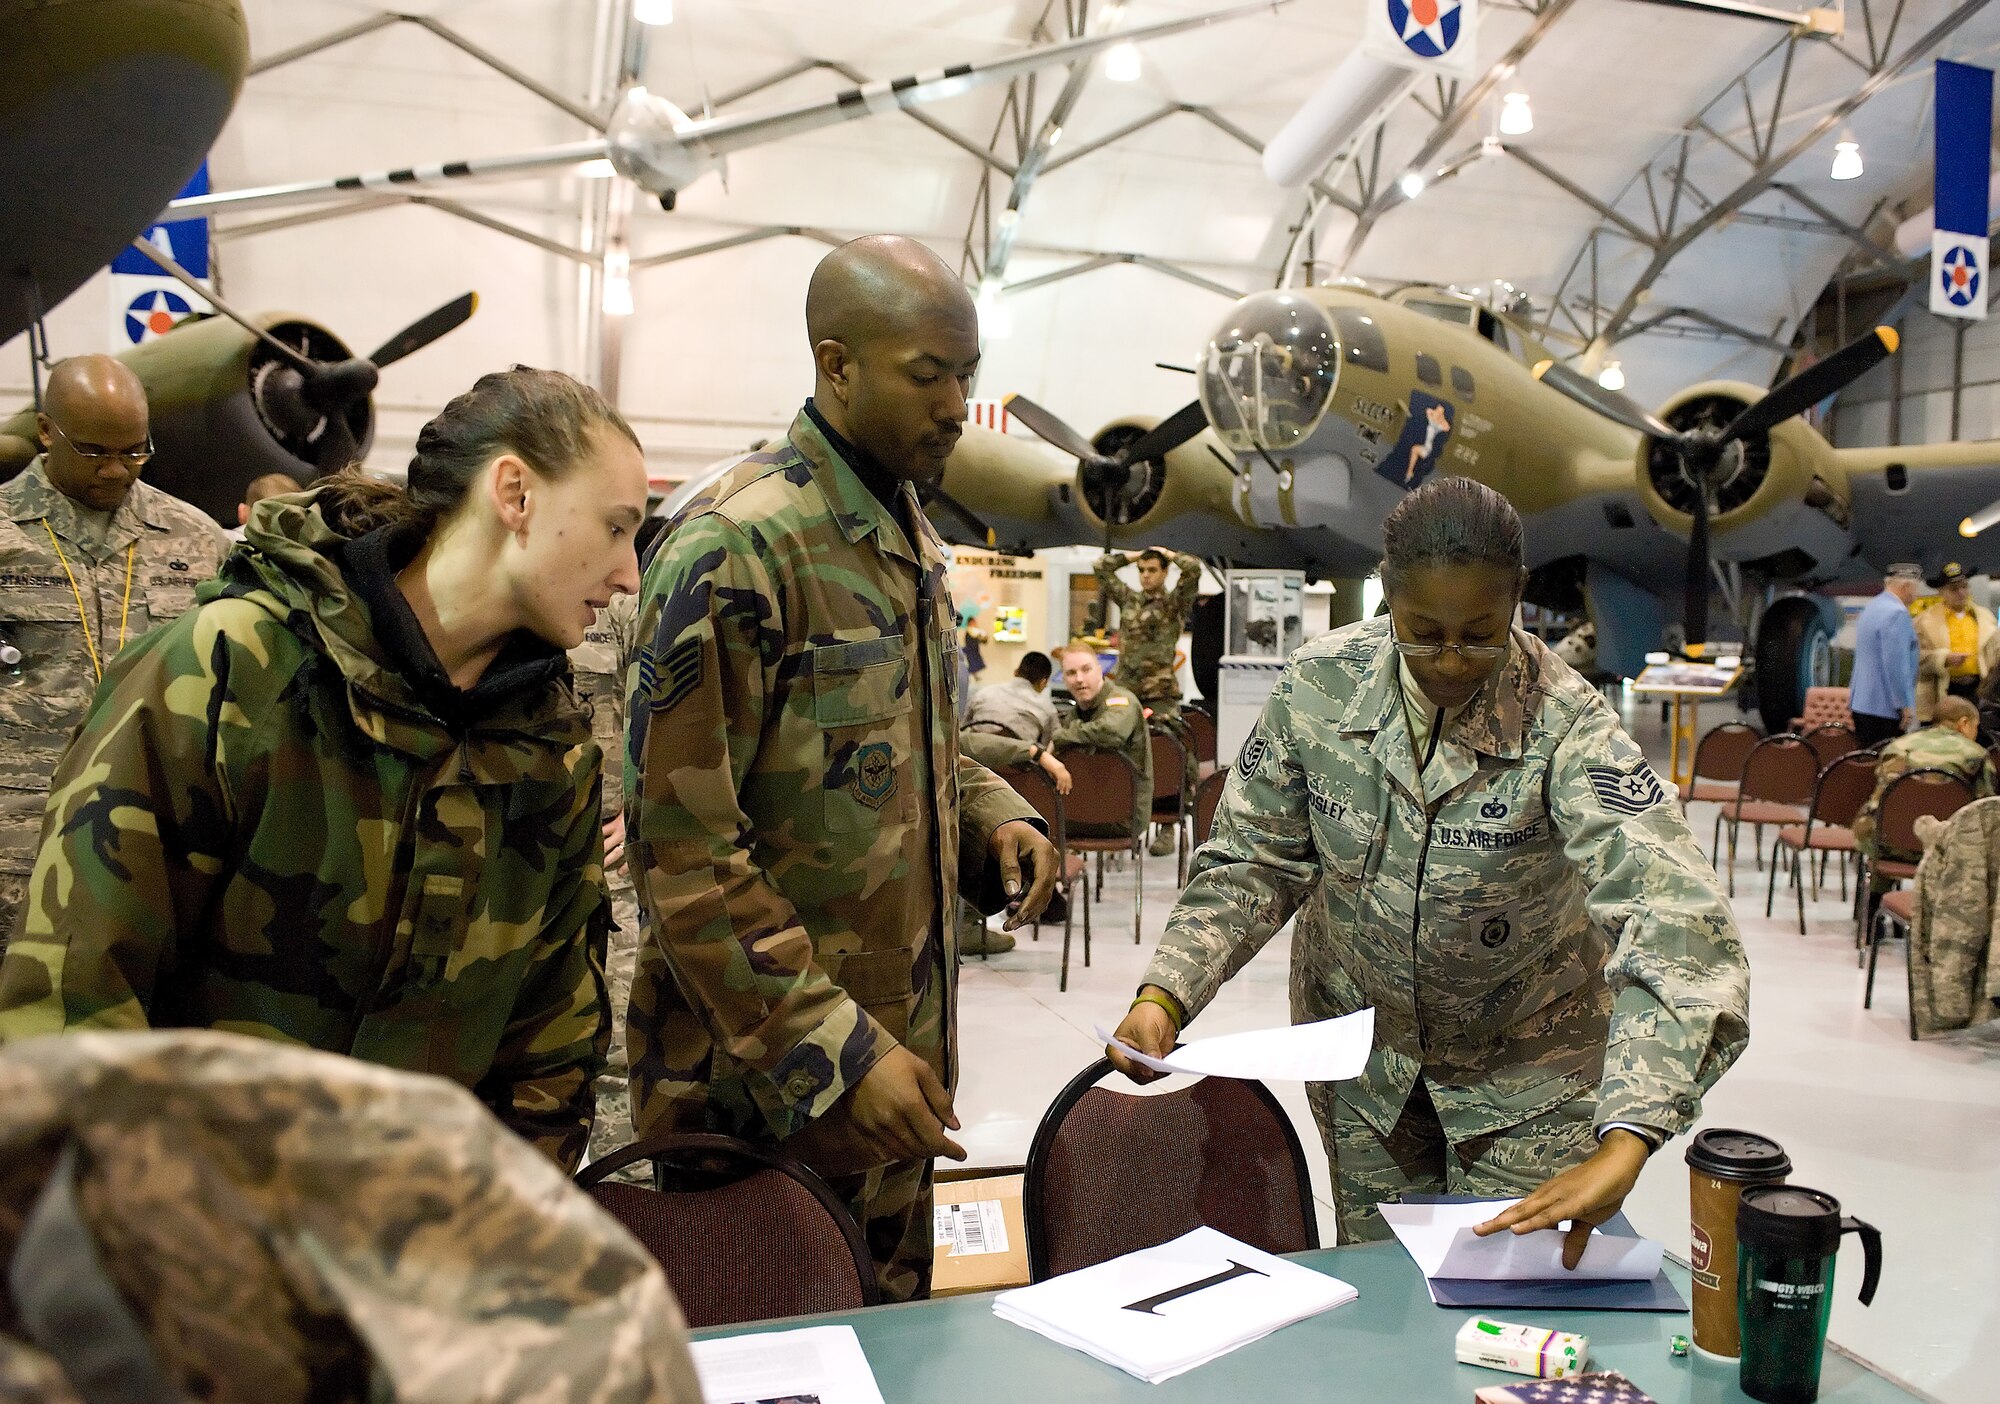 Tech. Sgt. Pamela Mosley, 436th Security Forces Squadron, hands out paperwork to participants in Dover?s 10th annual Ruck March Feb. 21 at the Air Mobility Command Museum. (U.S. Air Force photo/ Roland Balik)